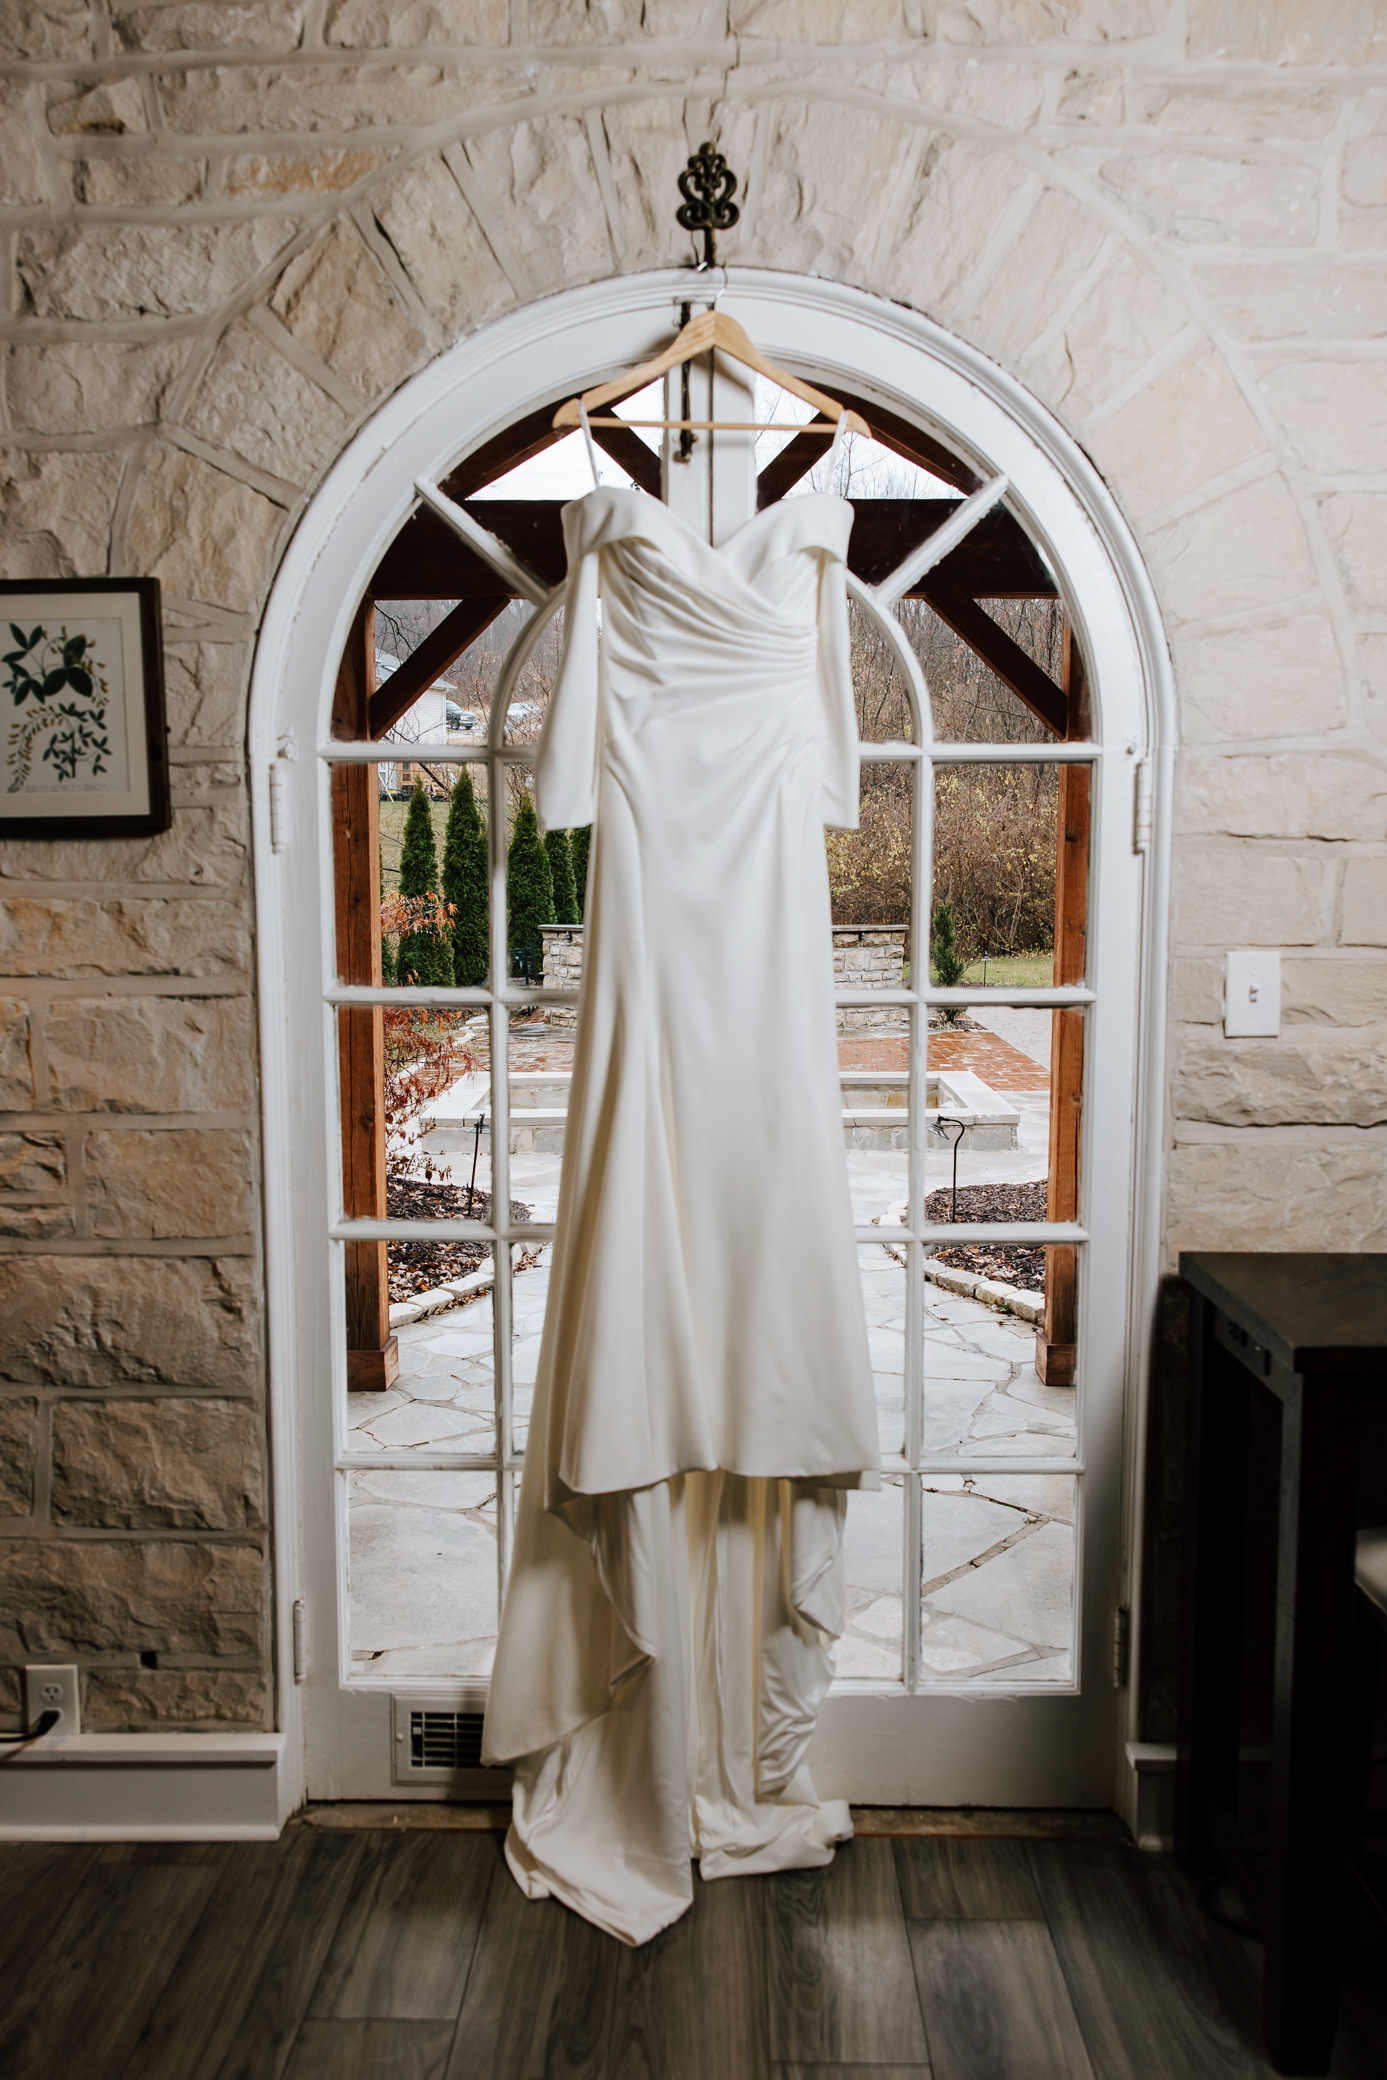 A minimalist white wedding dress with sleeves and ruched fabric hangs from a hook overtop of a doorway in the bridal suite at Knotting Hills in Pevely, Missouri. The walls are made of stone, and a fireplace and garden can be seen in the background through the door's glass window panes.